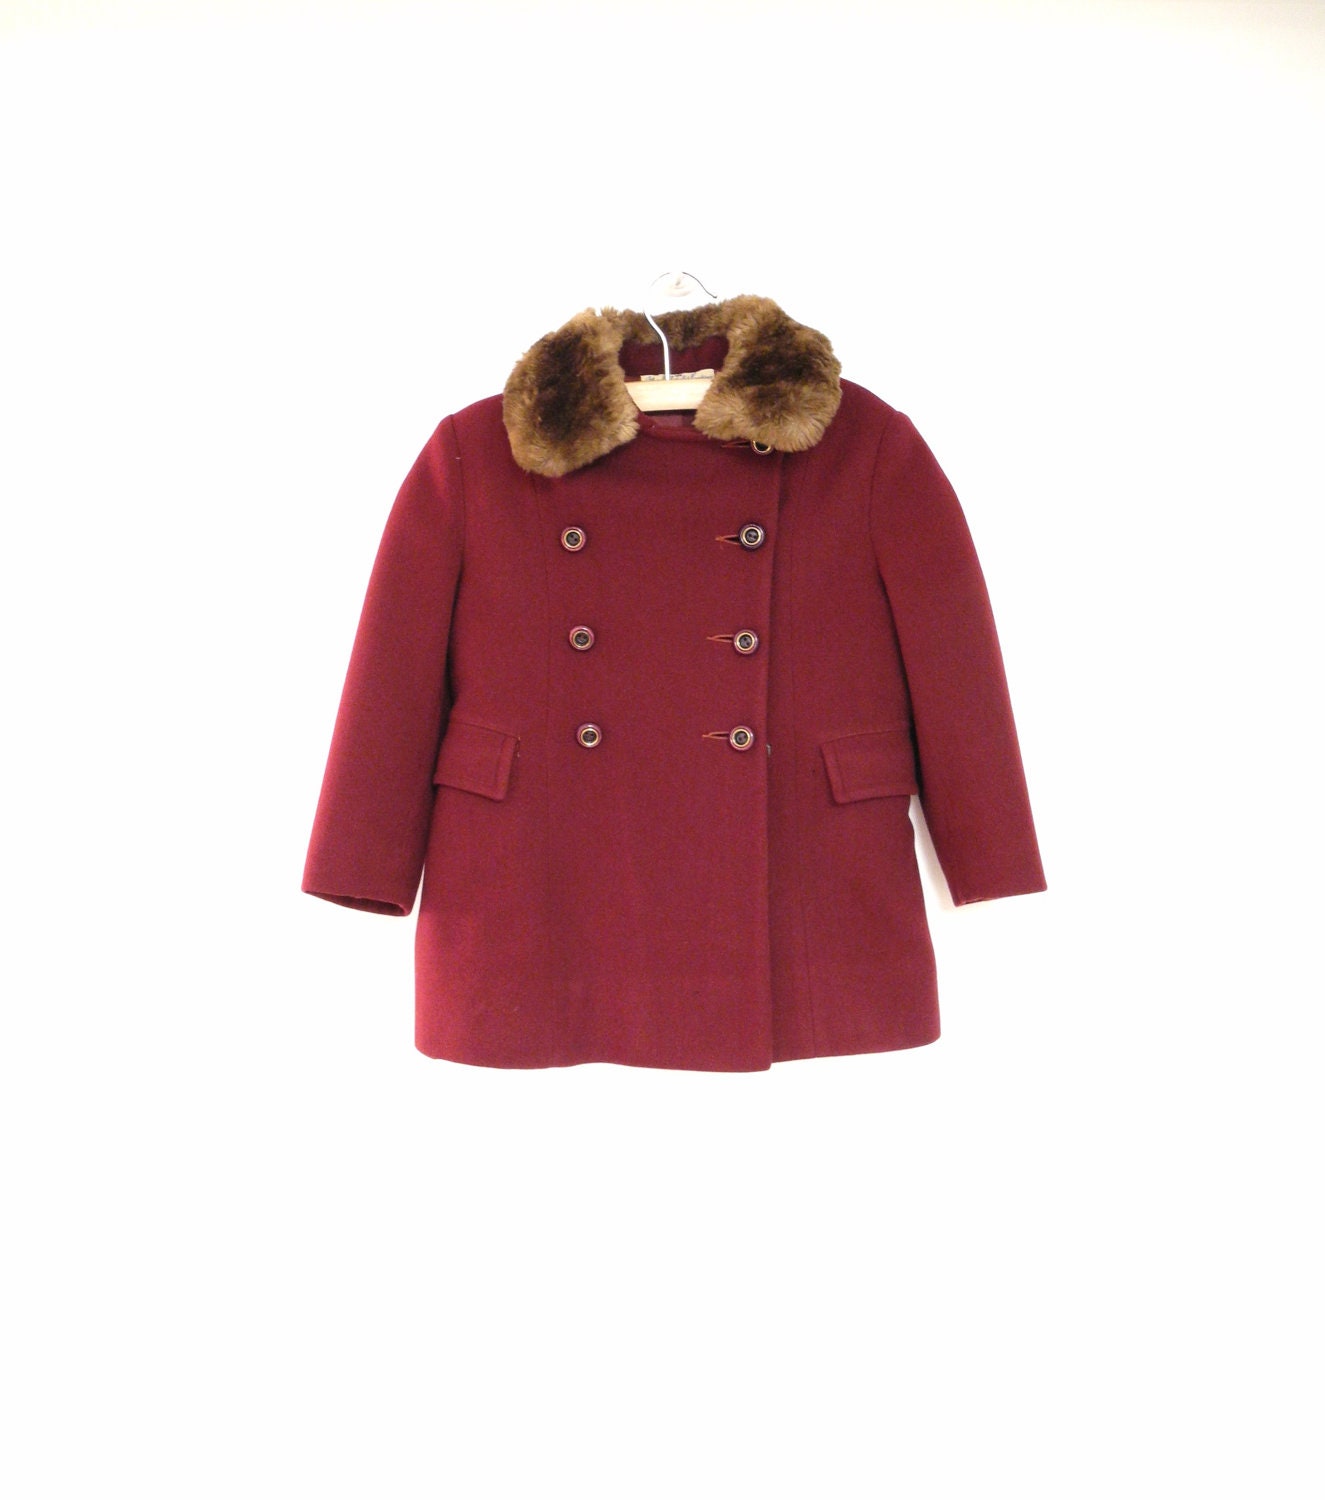 1950's Marshall Fields Double Breasted Red Burgundy Wool Coat with Fur Trim - BabyTweeds